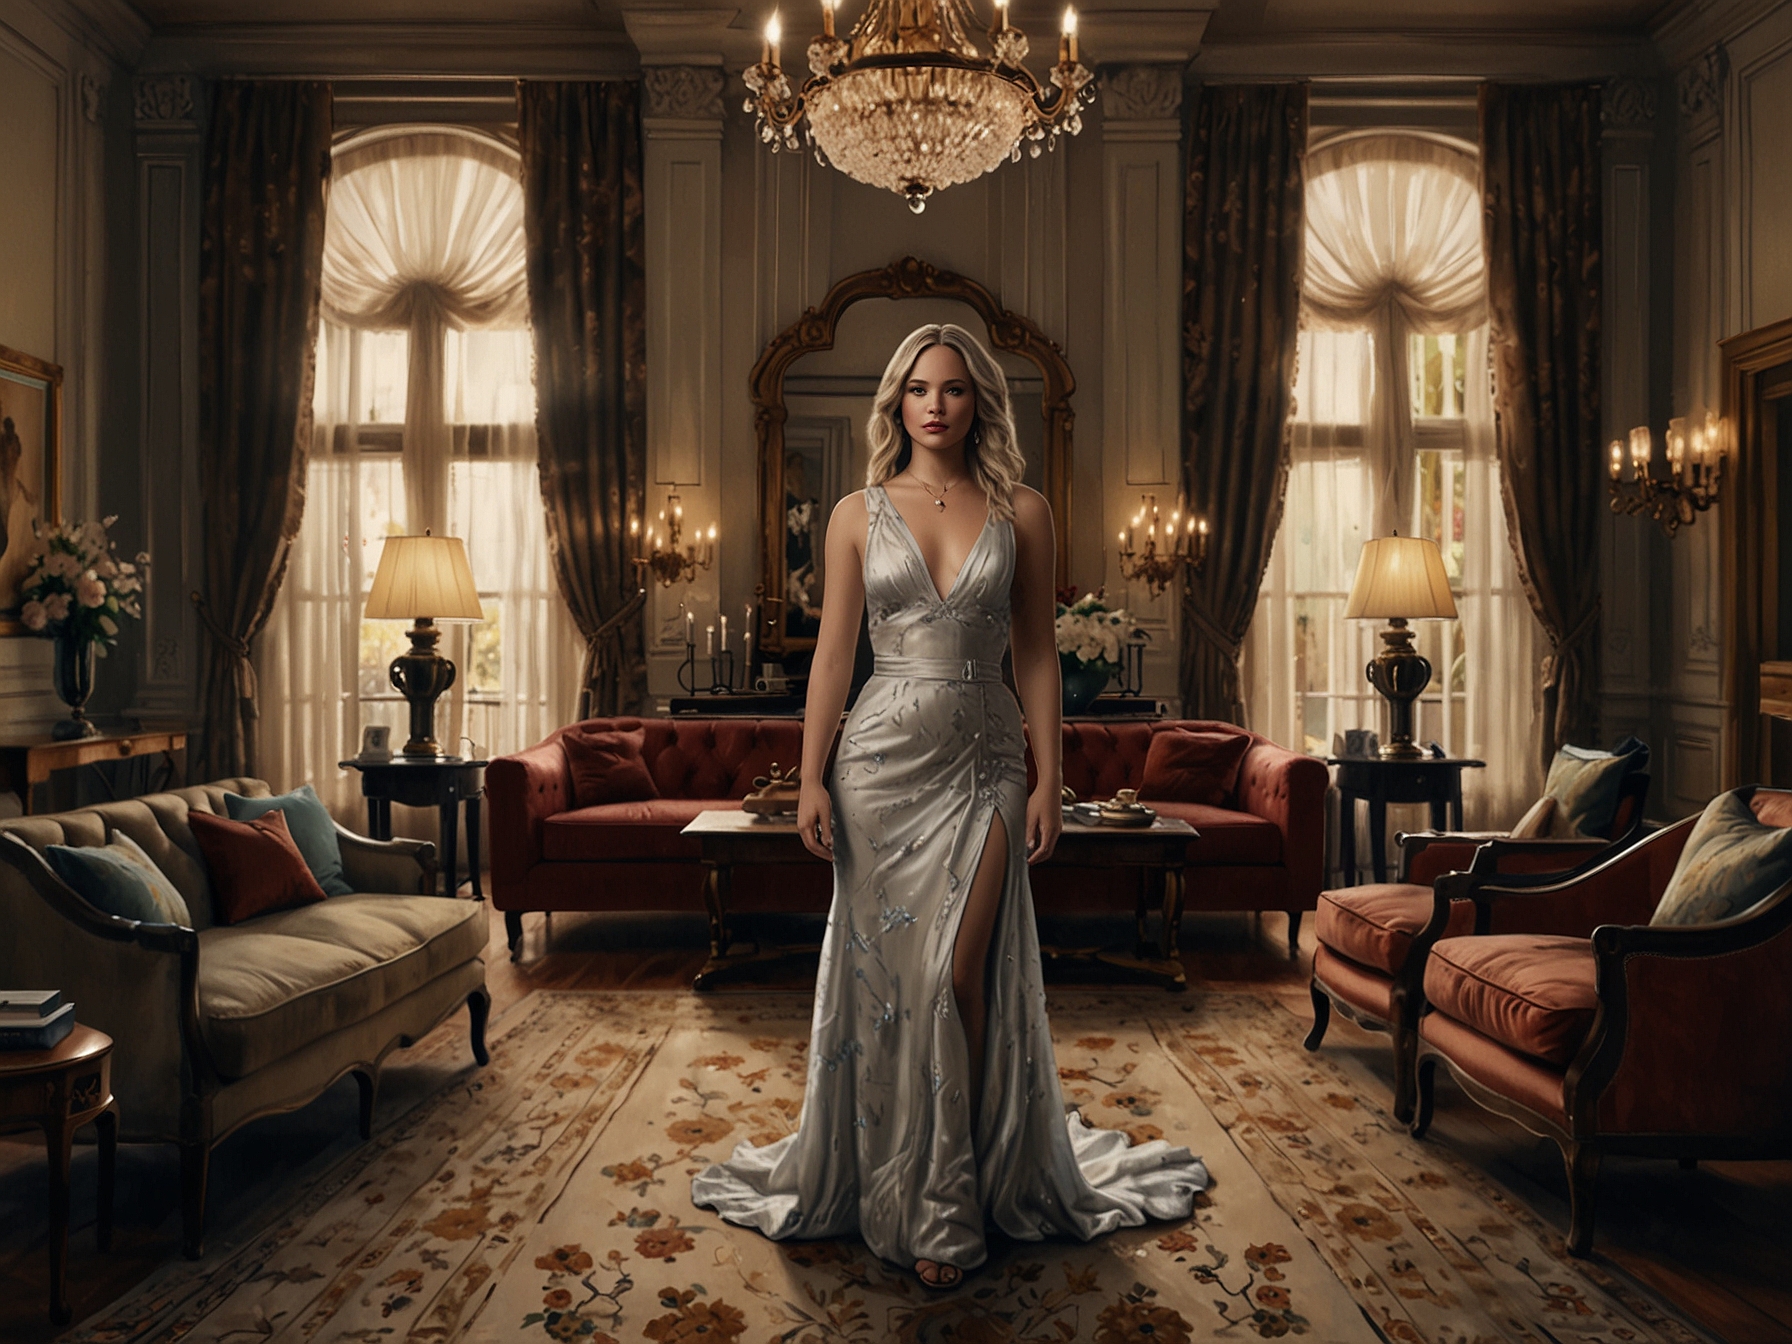 Jennifer Lawrence stands in an opulent living room, surrounded by lavish decor and luxurious furnishings, symbolizing the high-society world her character inhabits in 'The Wives'.